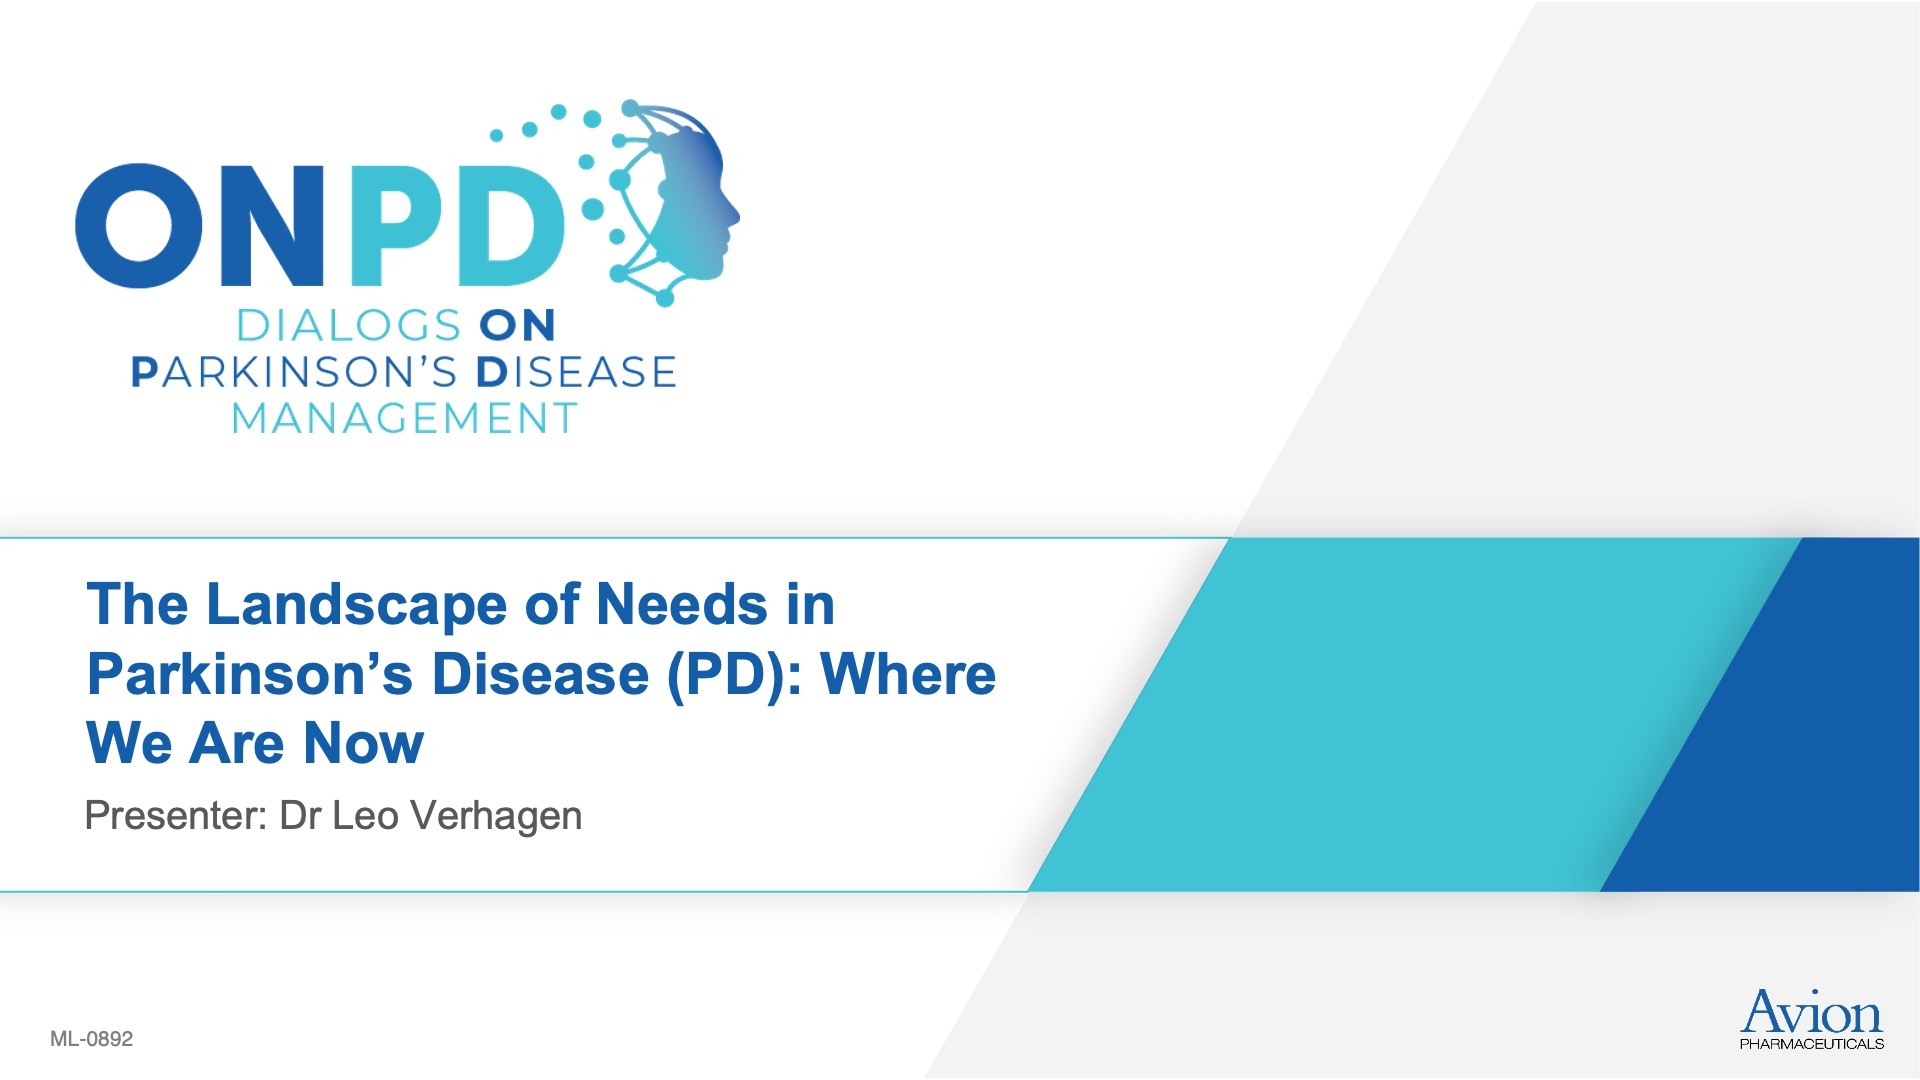 The Landscape of Needs in Parkinson's Disease (PD): Where We Are Now